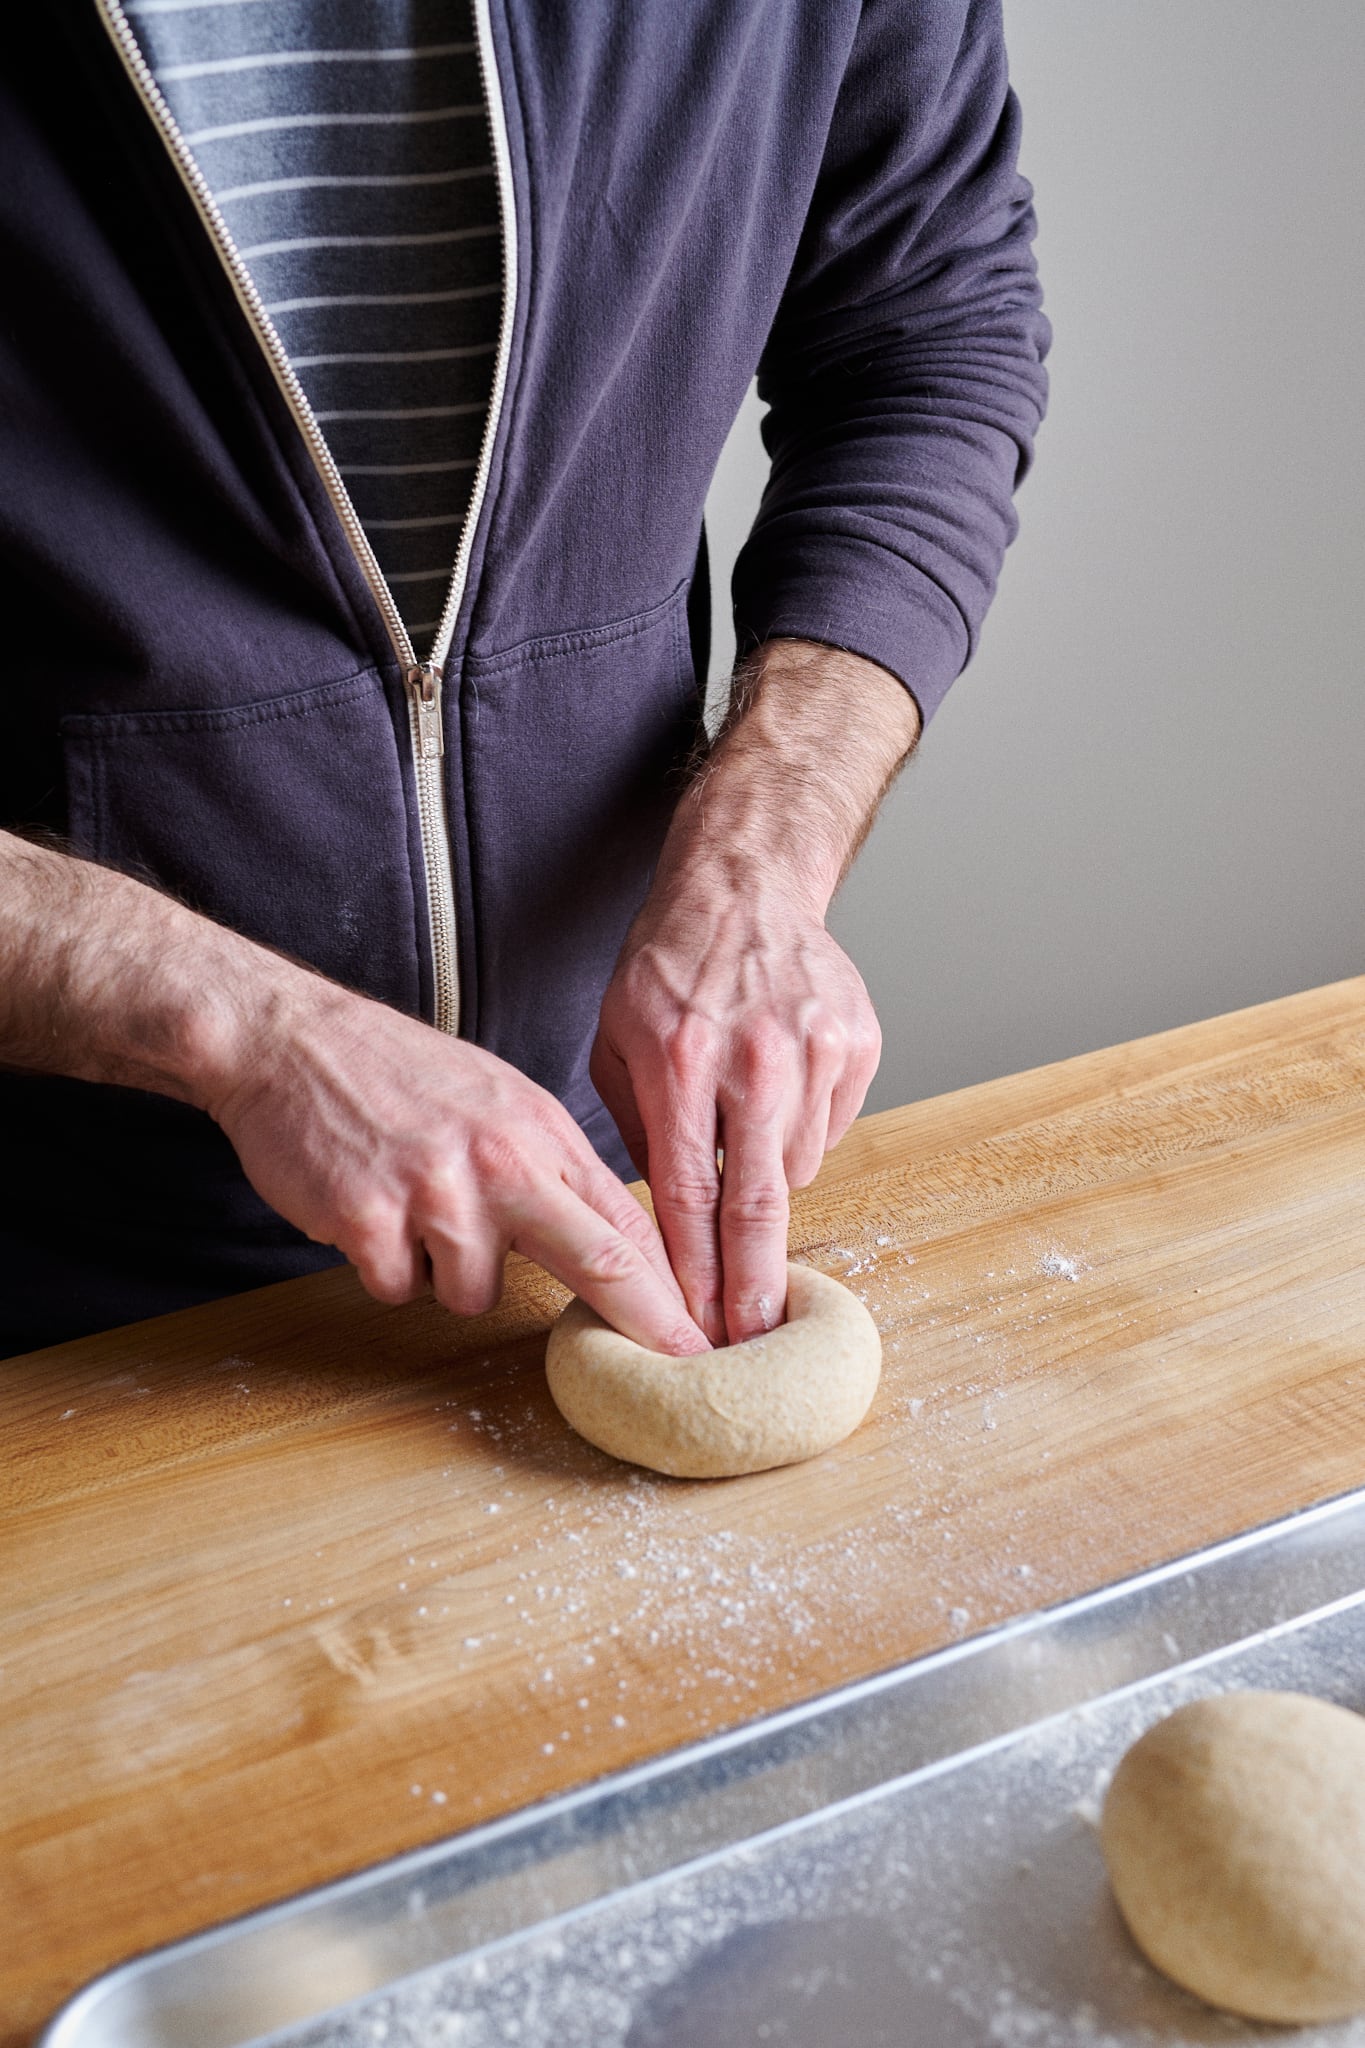 Punching a hole in the sourdough friselle dough to make a ring.